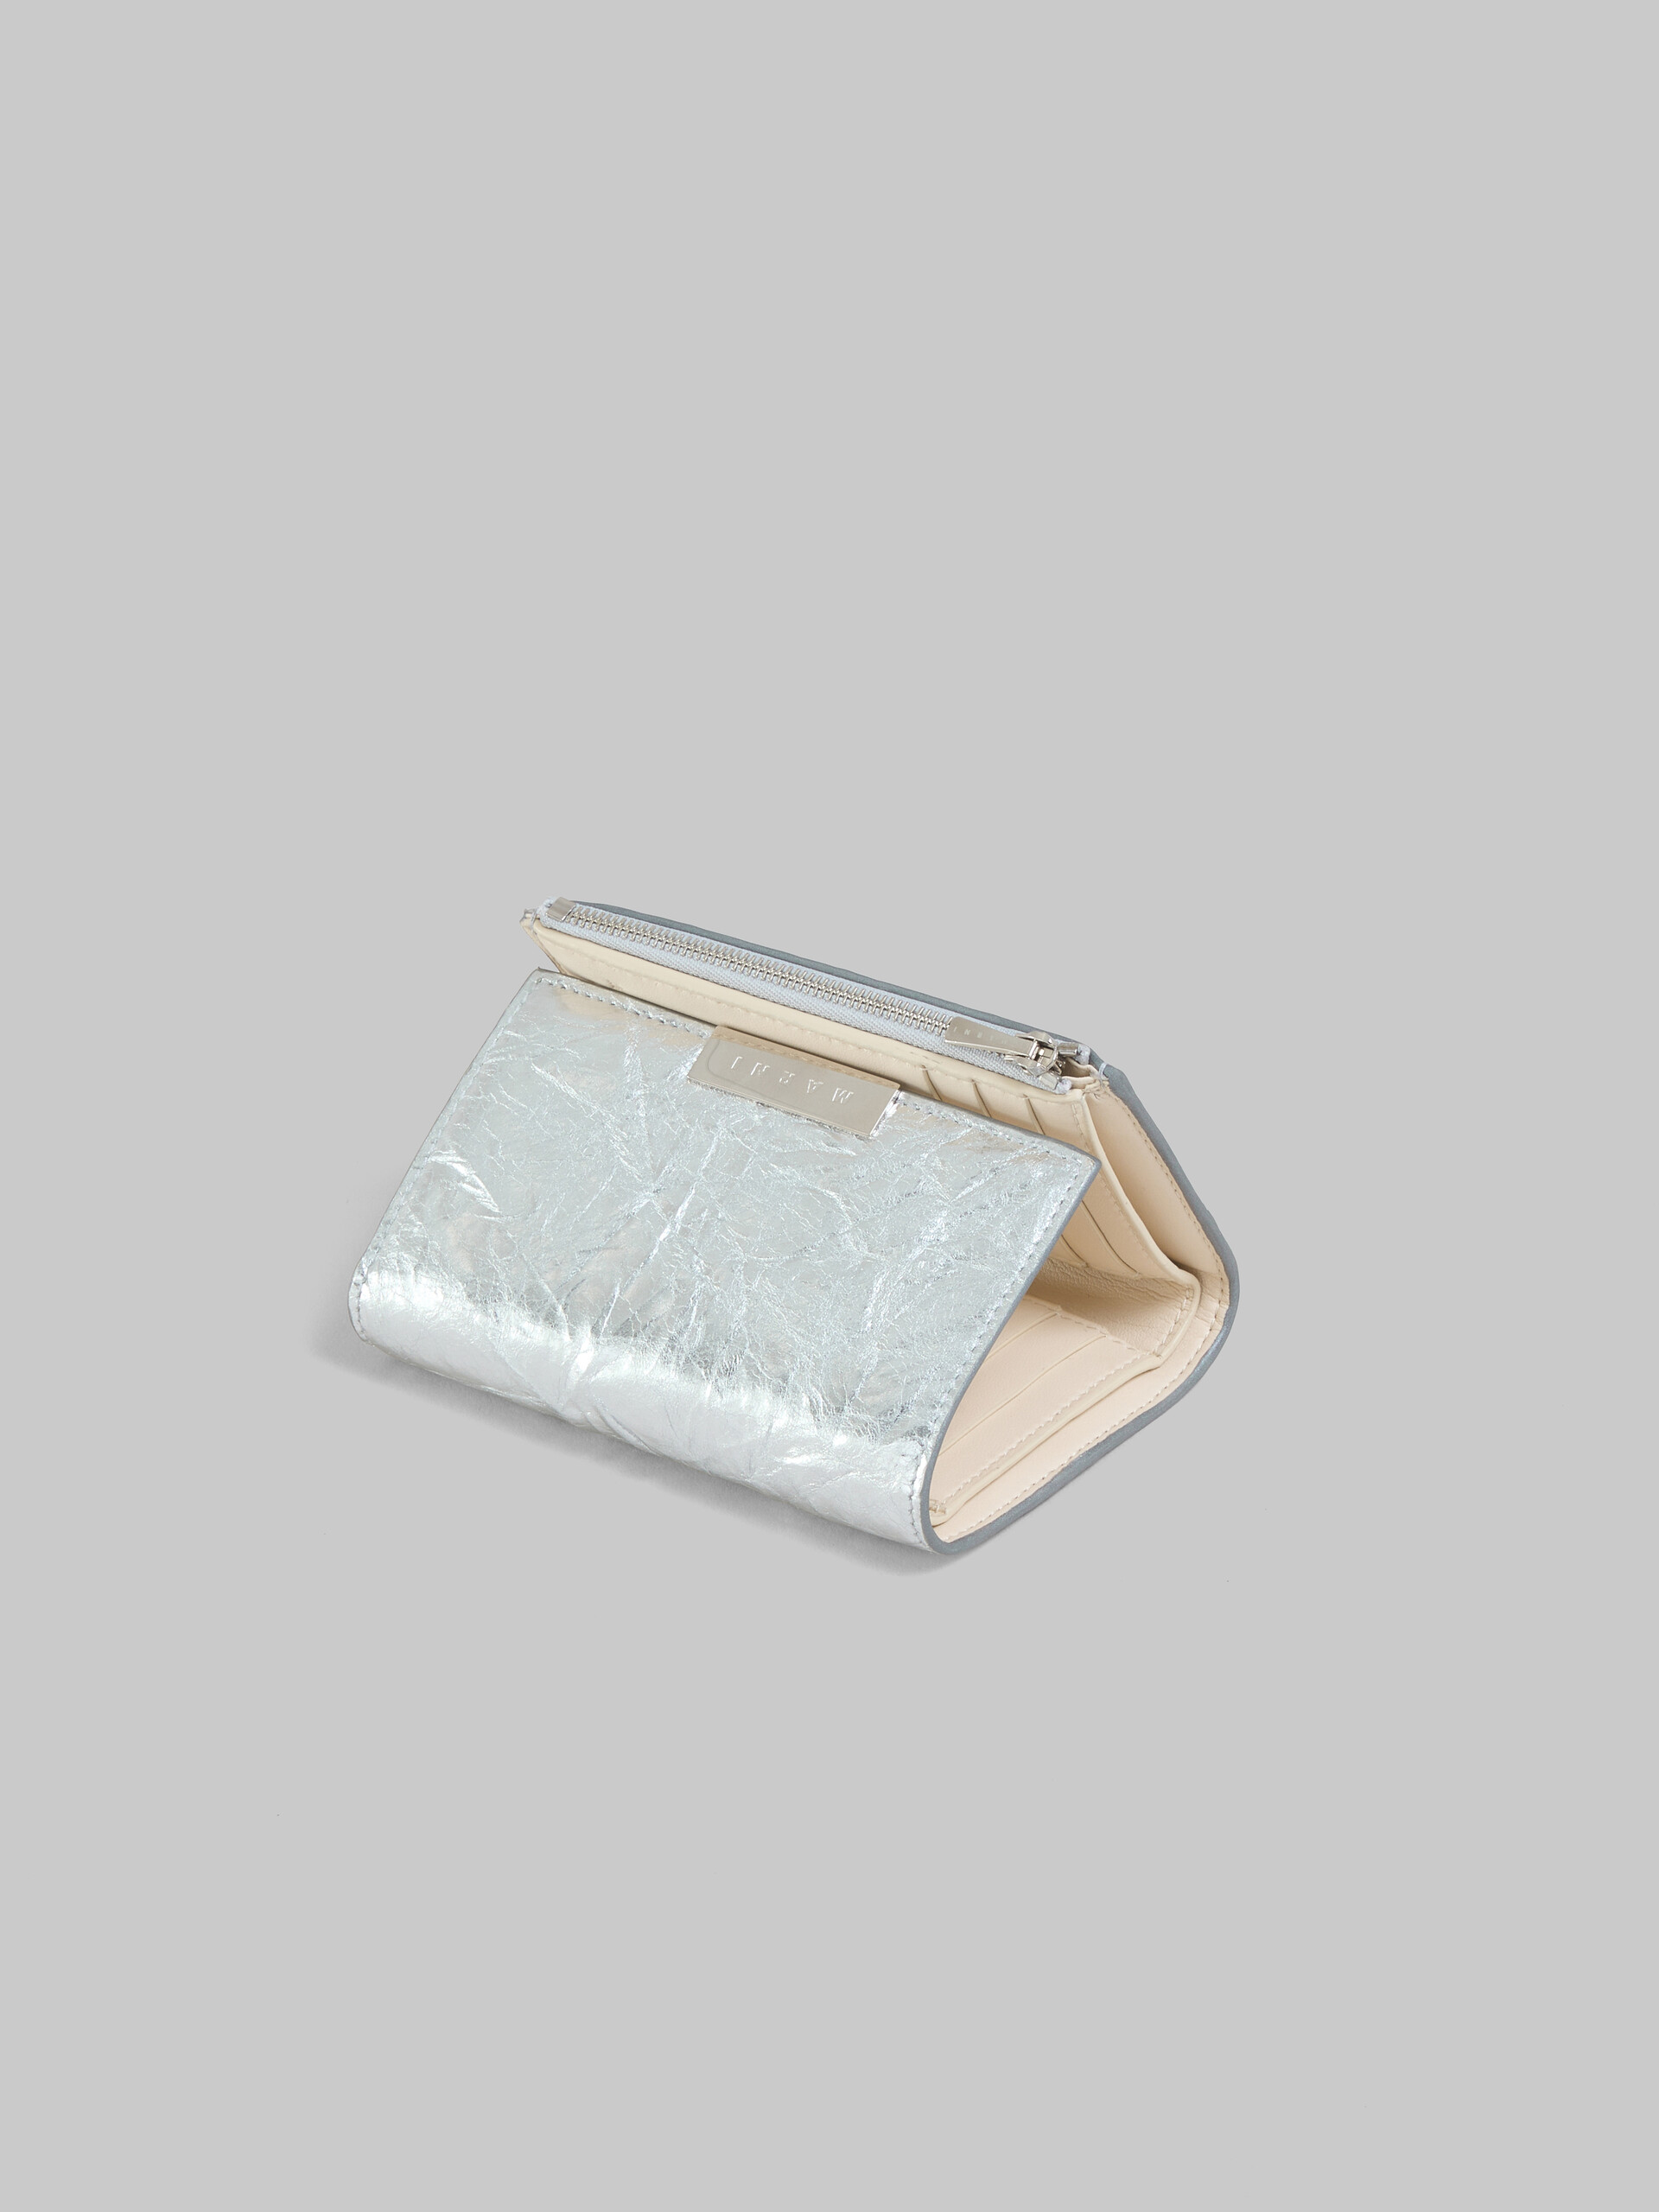 Silver leather trifold Prisma wallet - Wallets - Image 4